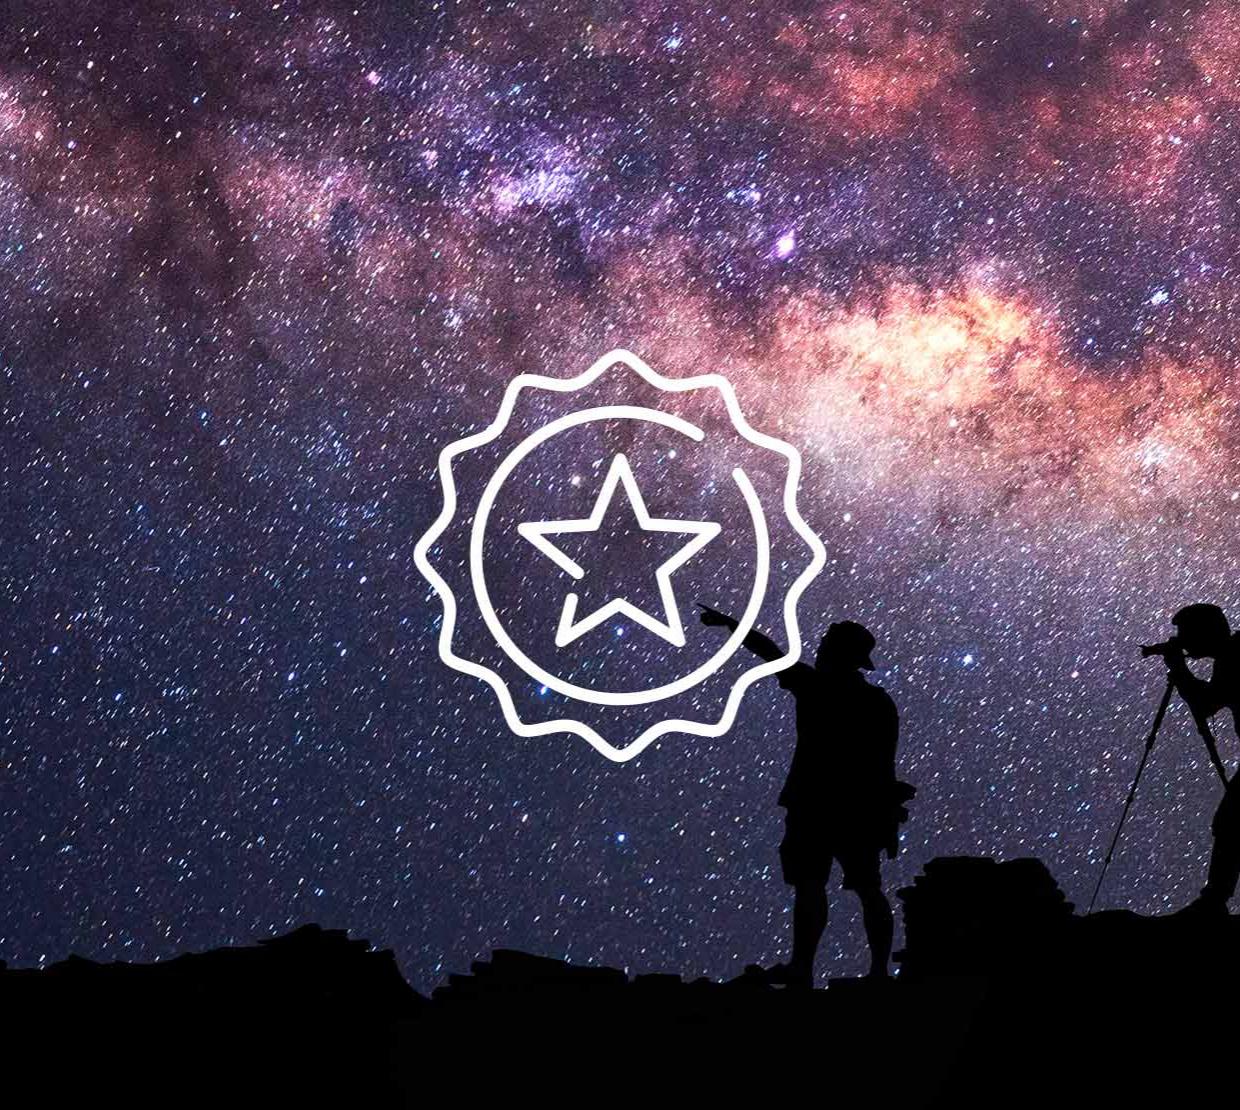 Star icon above starry night sky with two silhouettes of explorers